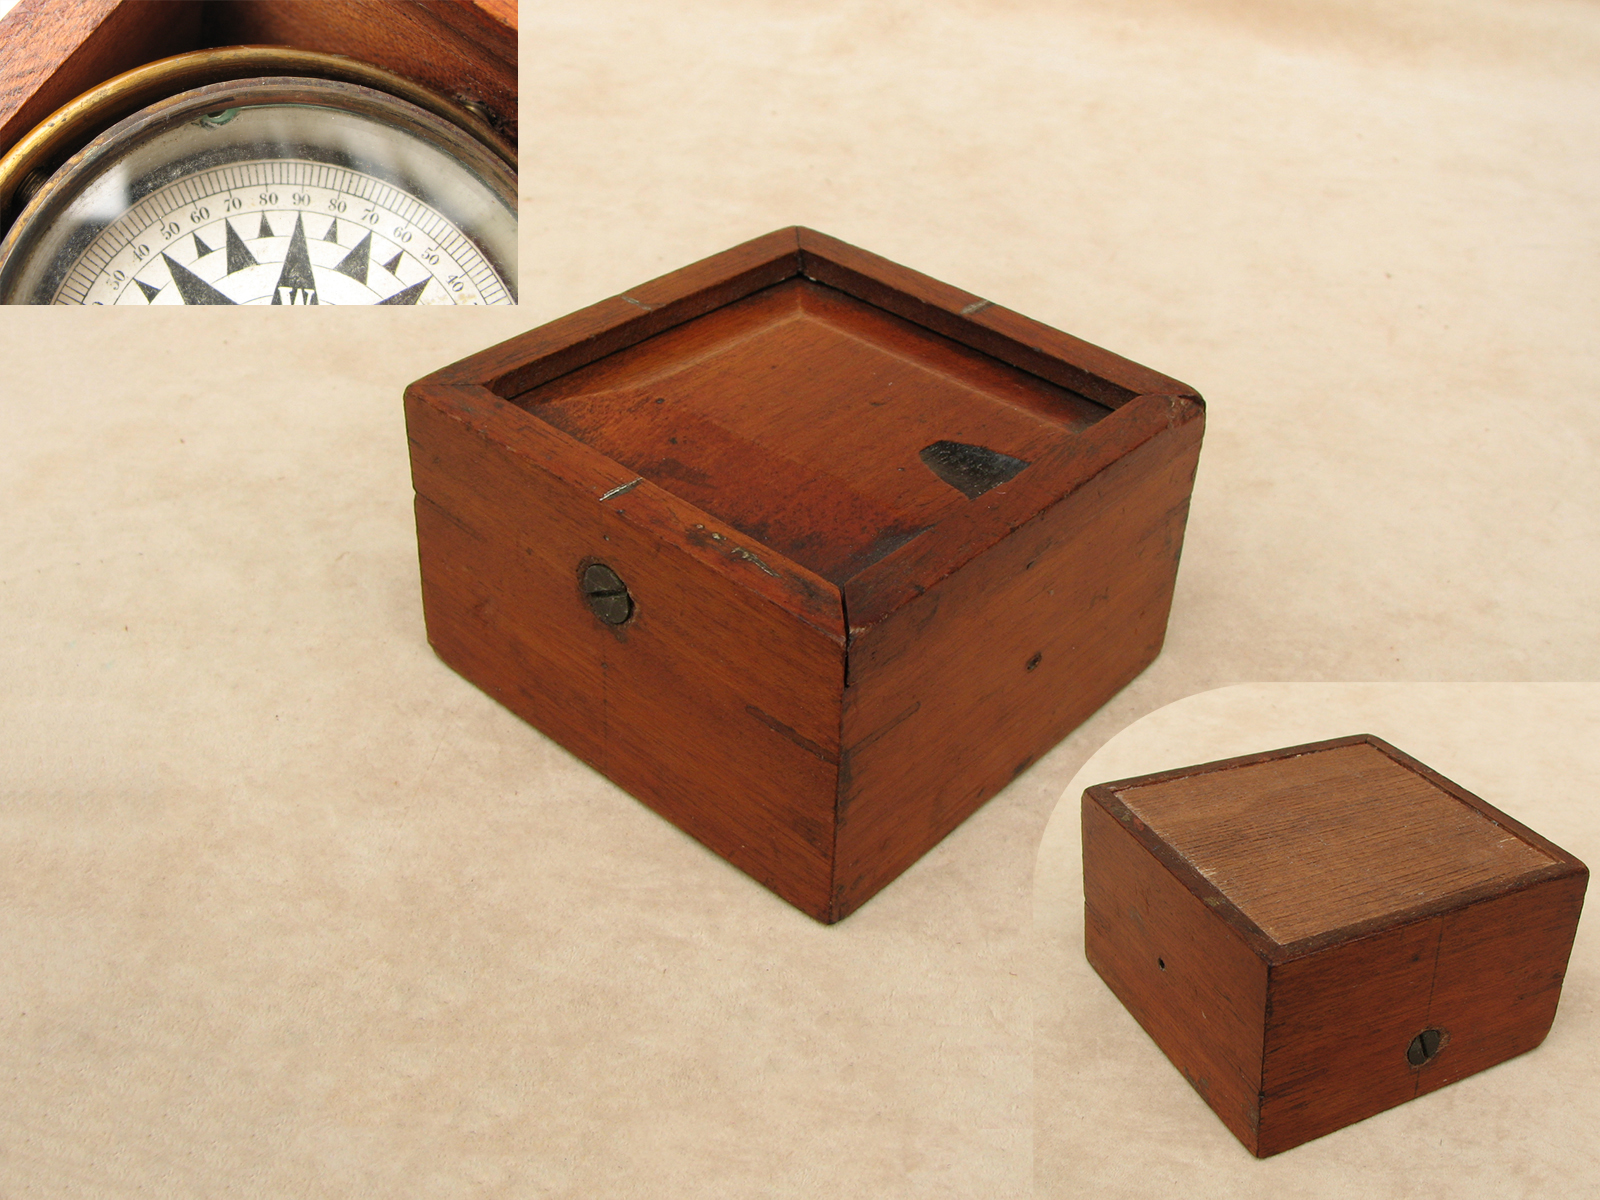 19th century gimbal mounted Mariners compass in dark oak case